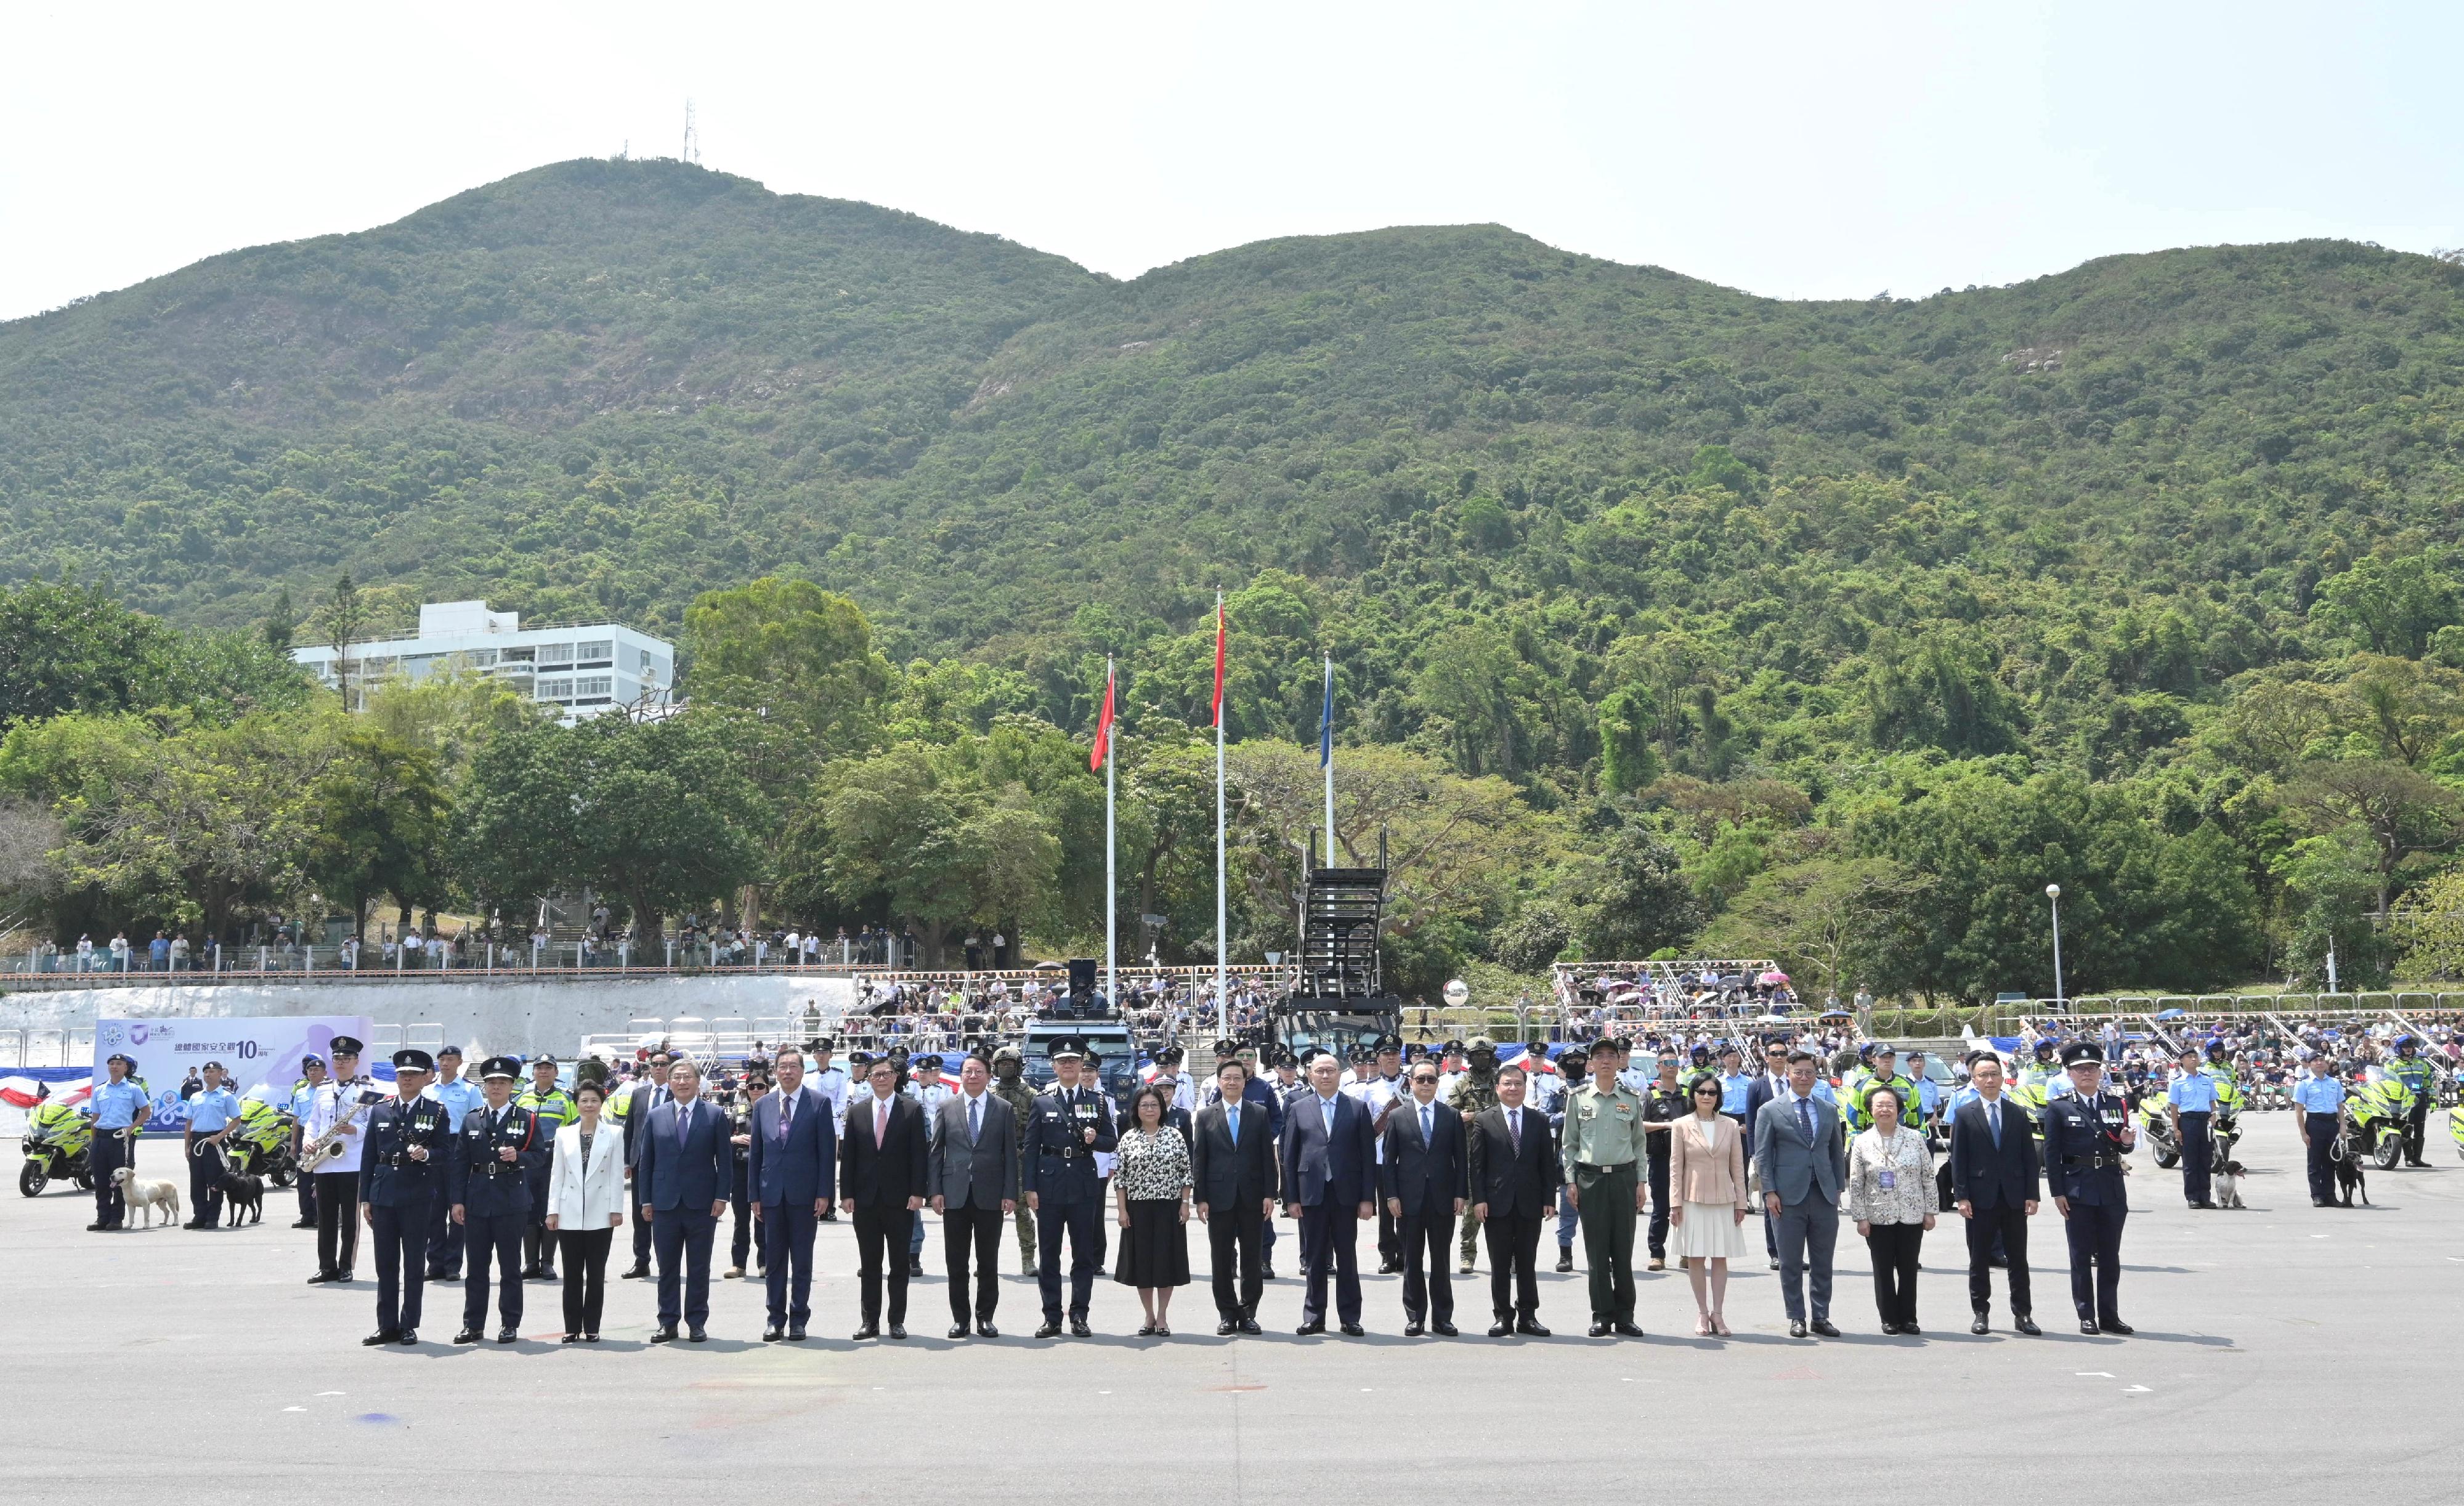 The Hong Kong Police Force held the “National Security Education Day cum Hong Kong Police Force 180th Anniversary Police College Open Day” today (April 13). Photo shows (first row, from fourth left) the Deputy Chief Secretary for Administration, Mr Cheuk Wing-hing; the President of the Legislative Council, Mr Andrew Leung; the Secretary for Security, Mr Tang Ping-keung; the Chief Secretary for Administration, Mr Chan Kwok-ki; the Commissioner of Police, Mr Siu Chak-yee; the wife of the Chief Executive, Mrs Janet Lee; the Chief Executive, Mr John Lee; the Director of the Liaison Office of the Central People's Government in the Hong Kong Special Administrative Region (HKSAR), Mr Zheng Yanxiong; Head of the Office for Safeguarding National Security of the Central People's Government in the HKSAR, Mr Dong Jingwei; Deputy Commissioner of the Office of the Commissioner of the Ministry of Foreign Affairs of the People's Republic of China in the HKSAR, Mr Fang Jianming; Deputy Commander of the Chinese People's Liberation Army Hong Kong Garrison, Major General Zheng Guoyue; the Convenor of the Non-official Members of the Executive Council, Mrs Regina Ip; and the Deputy Secretary for Justice, Mr Cheung Kwok-kwan, with other guests and performers.